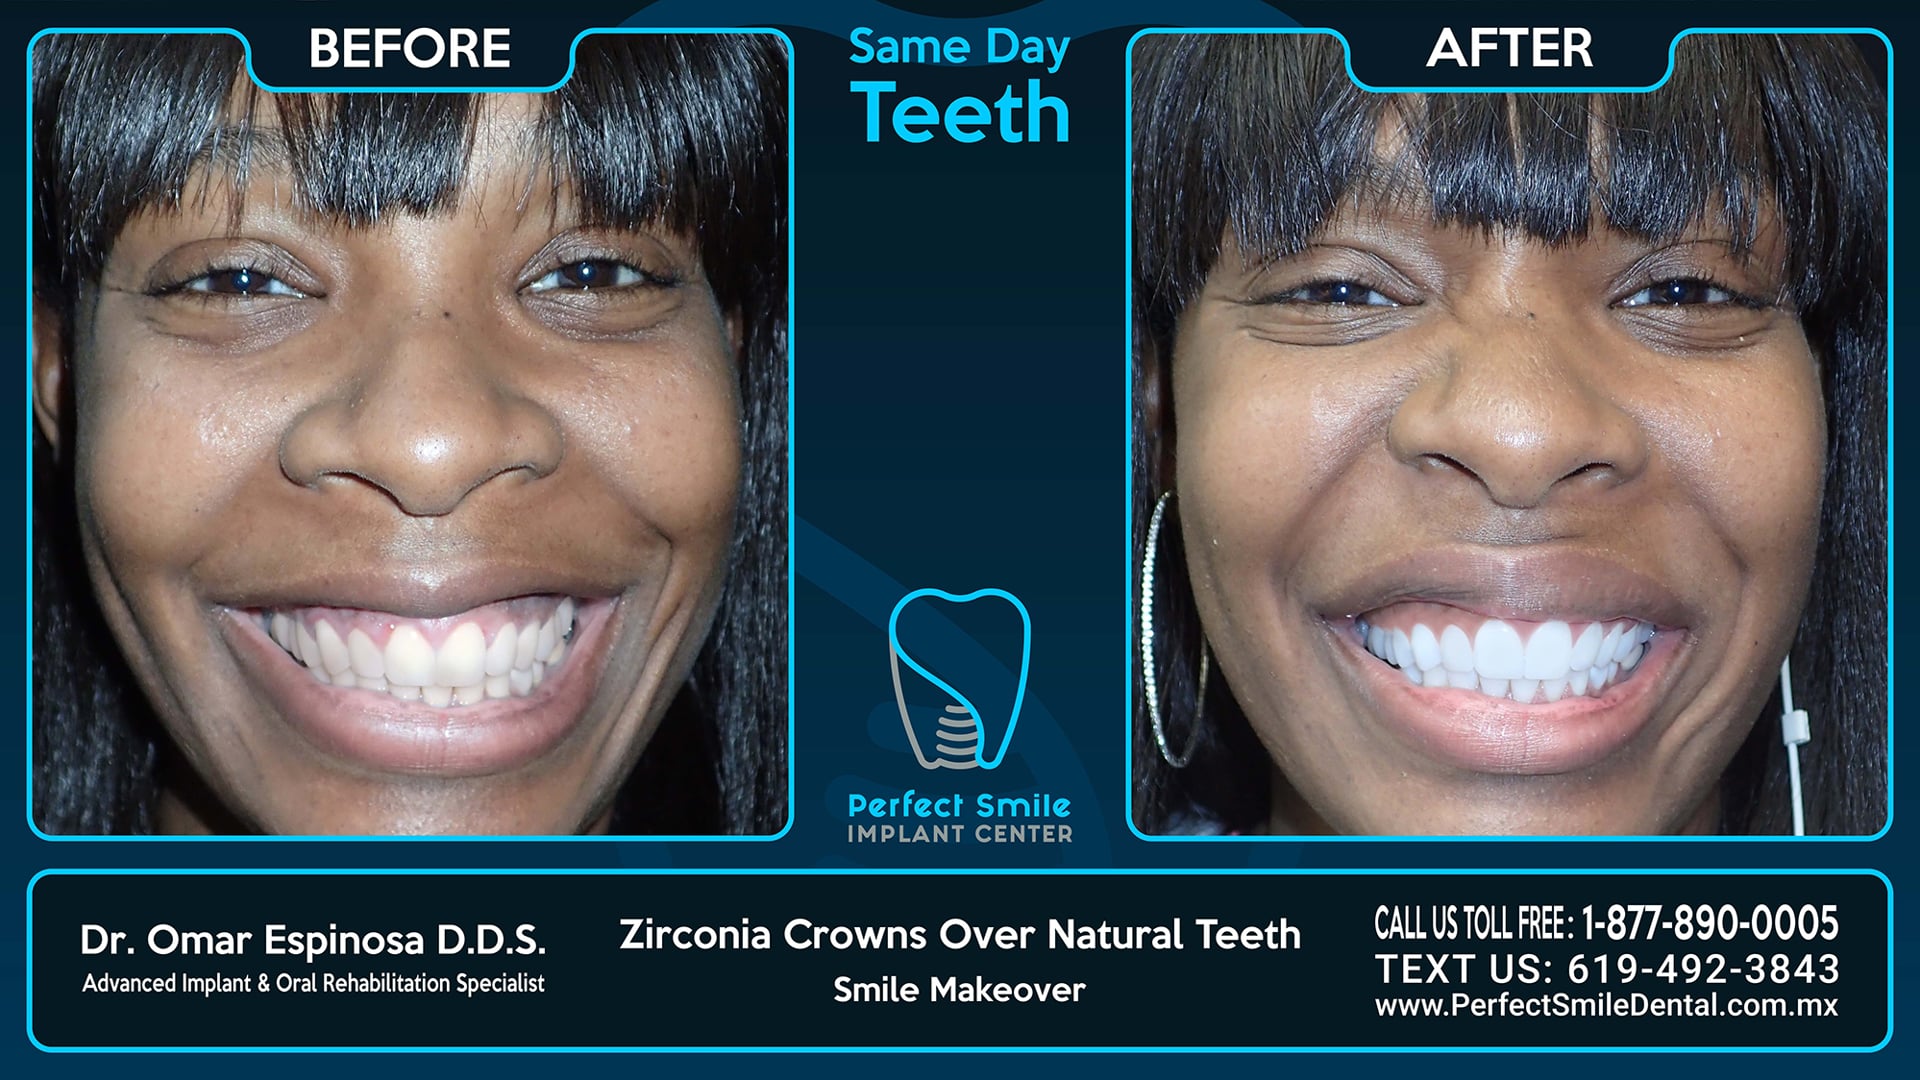 Zirconia Crowns Over Natural Teeth - Perfect Smile Implant Center - Tijuana, Mexico